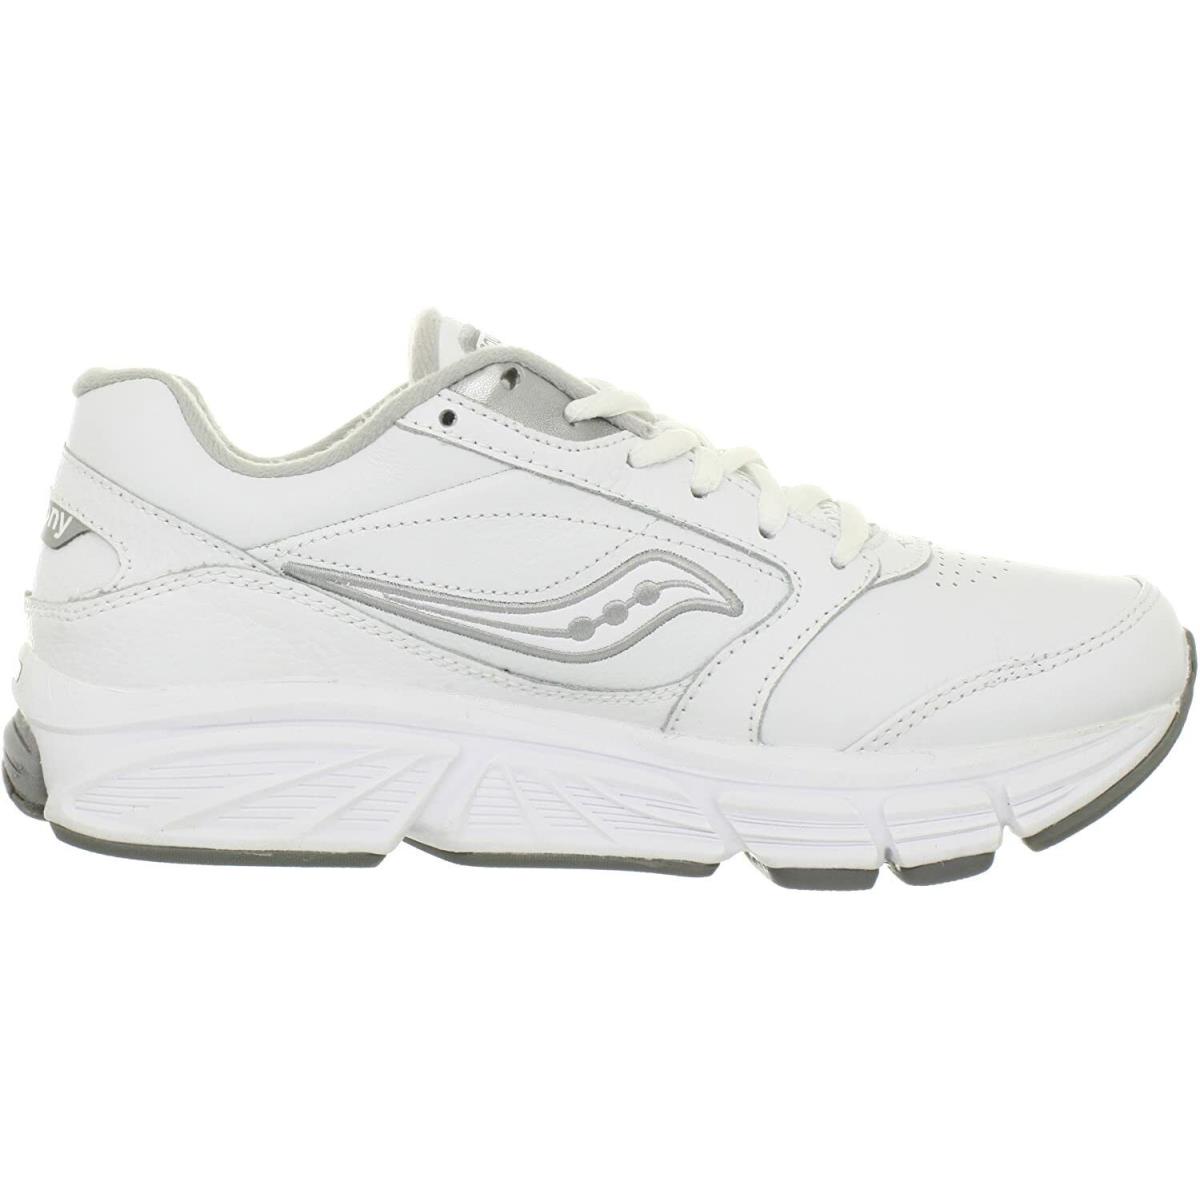 Saucony shoes  - White 4